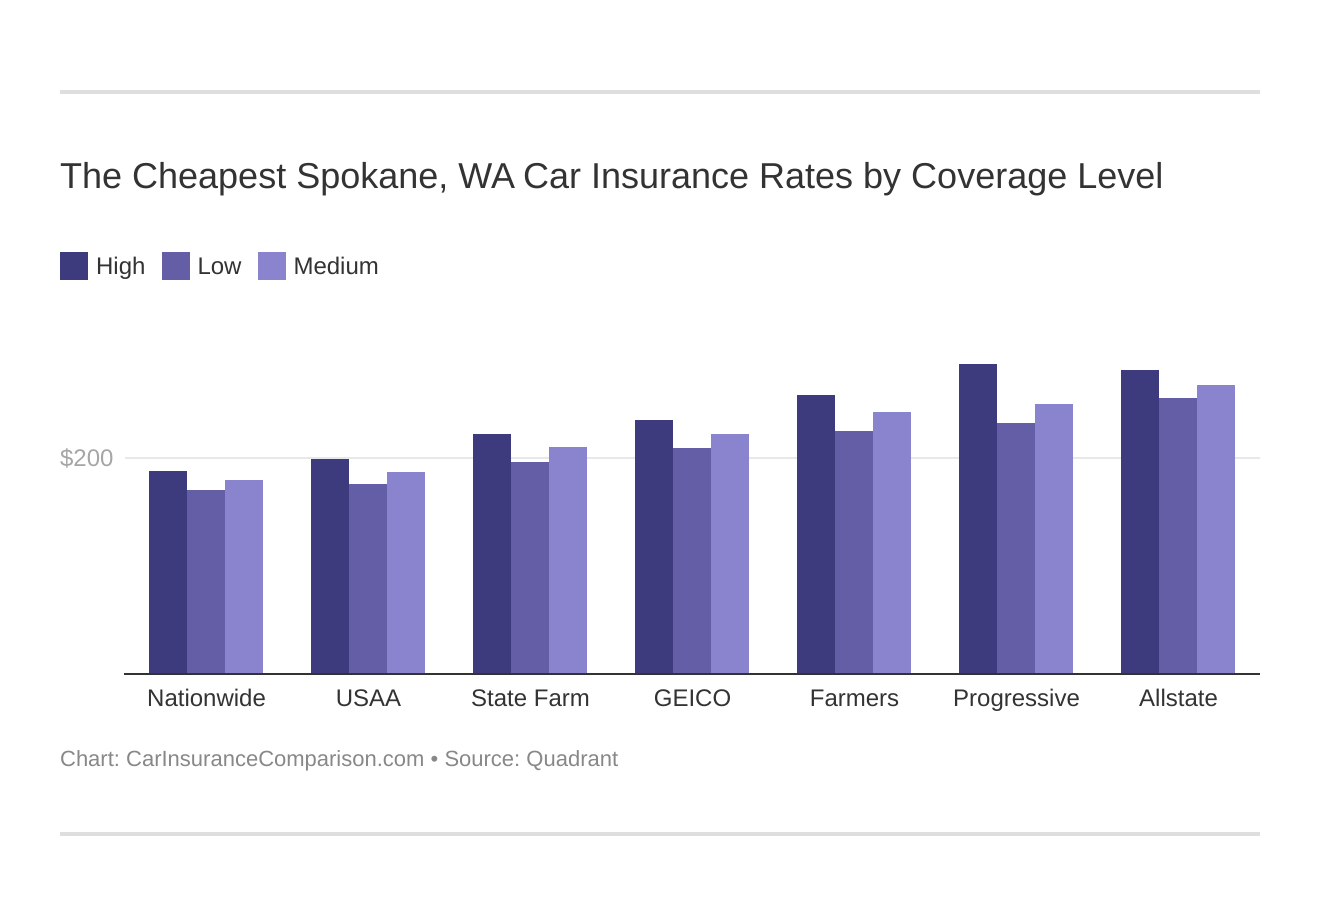 The Cheapest Spokane, WA Car Insurance Rates by Coverage Level